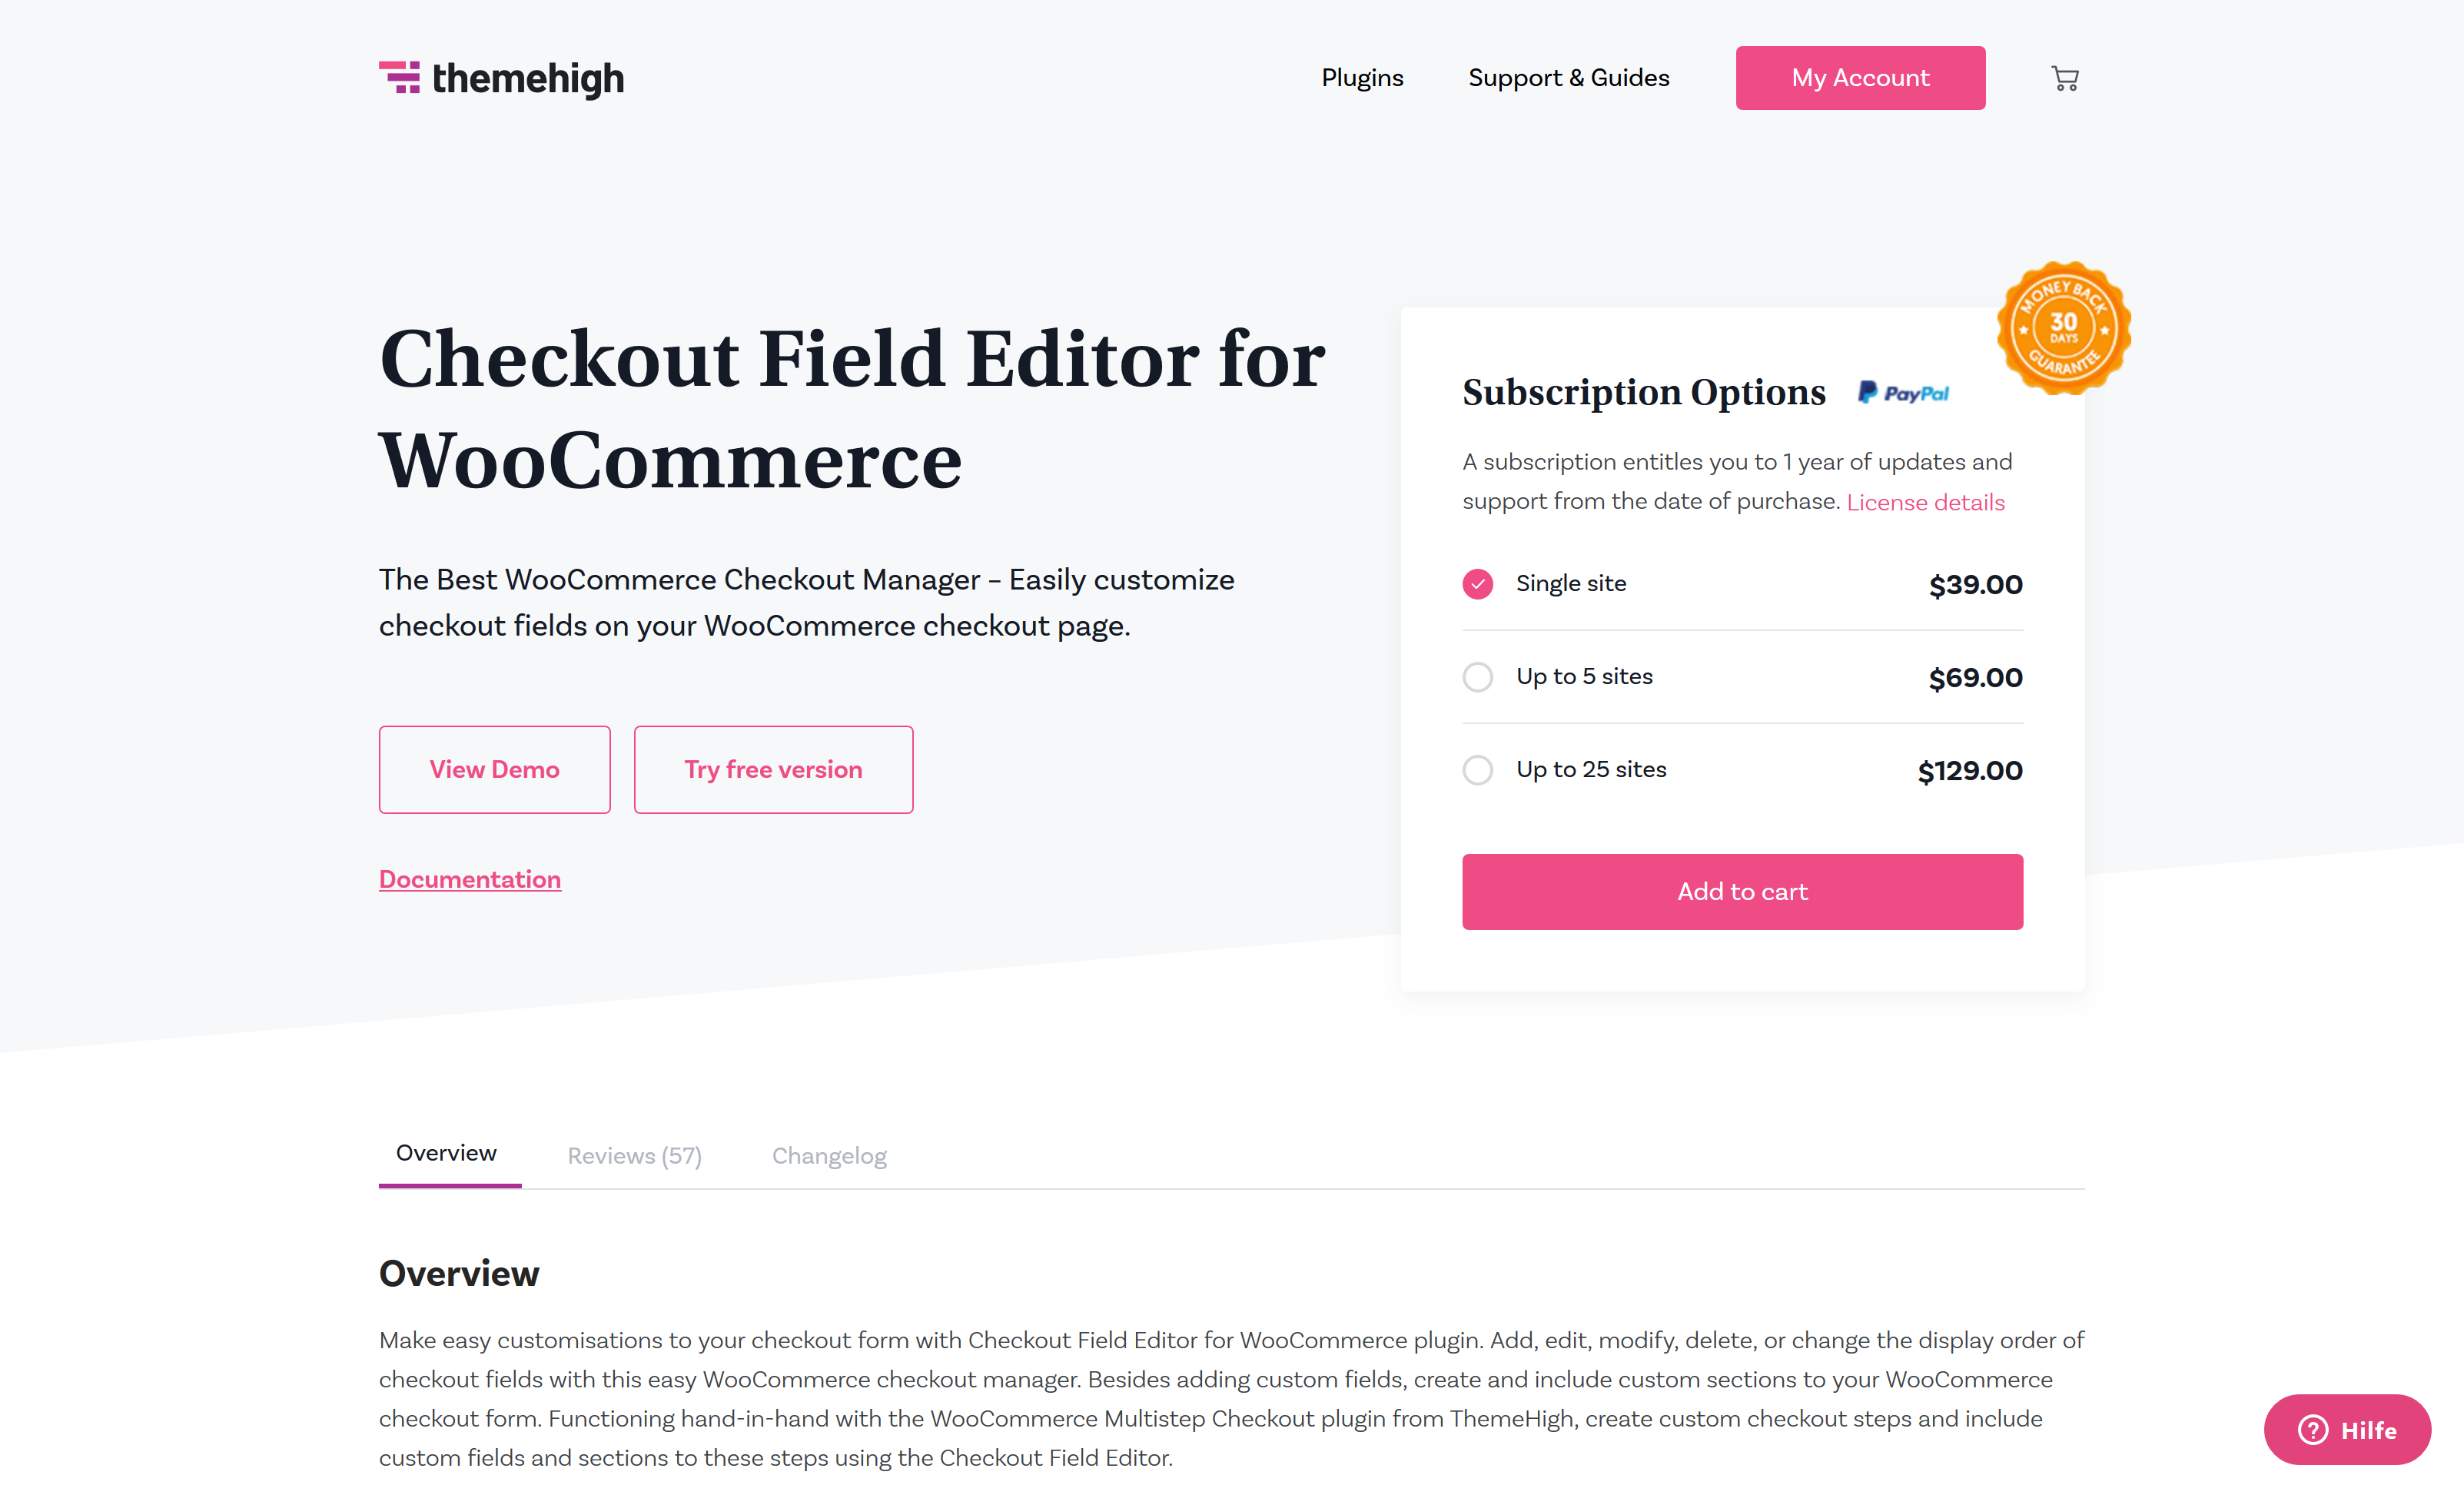 Checkout Field Editor for WooCommerce 3.6.1.0 by Themehigh